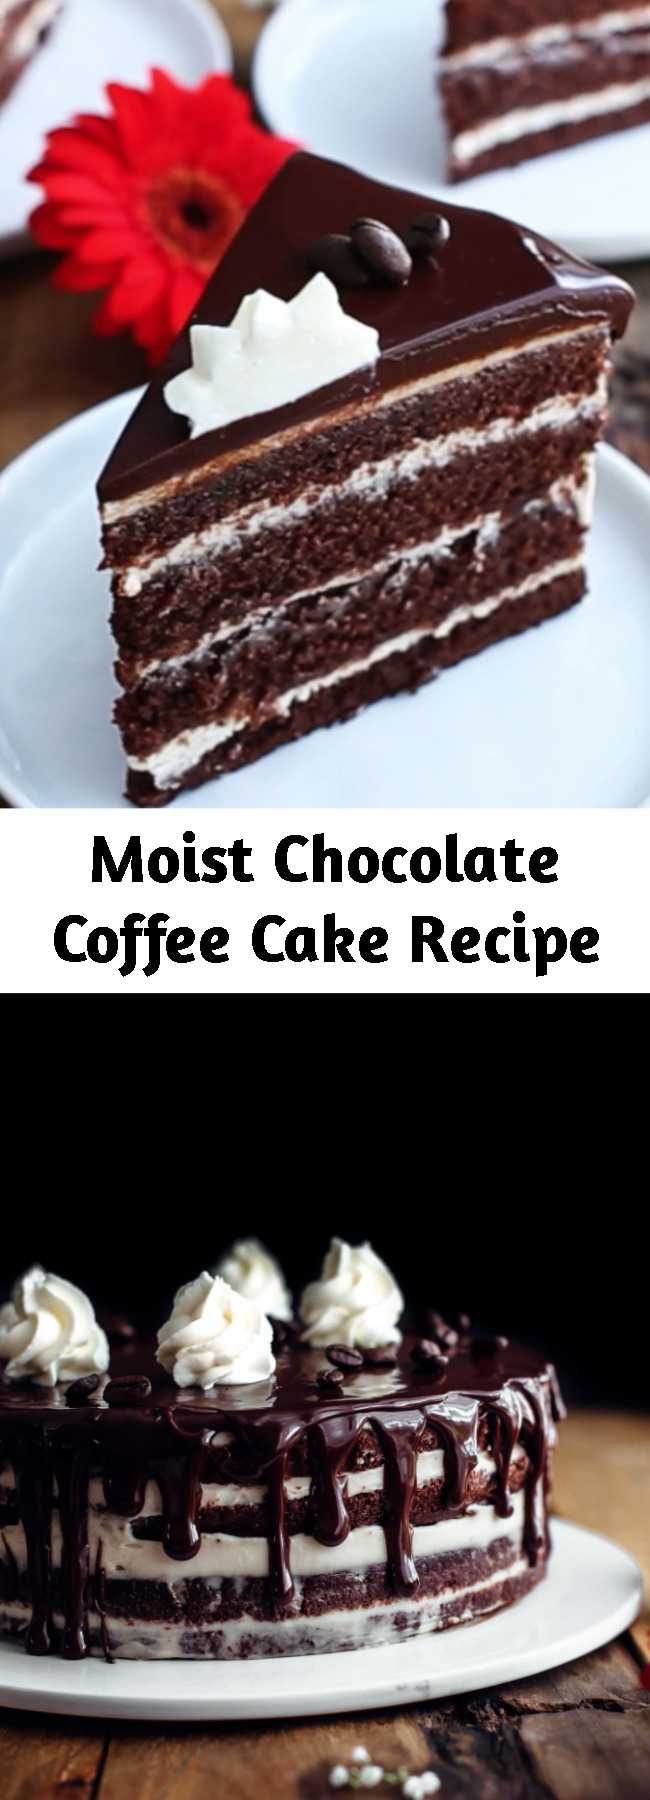 Moist Chocolate Coffee Cake Recipe - This cake is moist, rich, and creamy. Intense chocolate and coffee taste. 4 coffee-infused chocolate cake layers frosted with coffee cream frosting and topped with chocolate ganache. #baking #coffeecake #chocolate #desserts #sweets